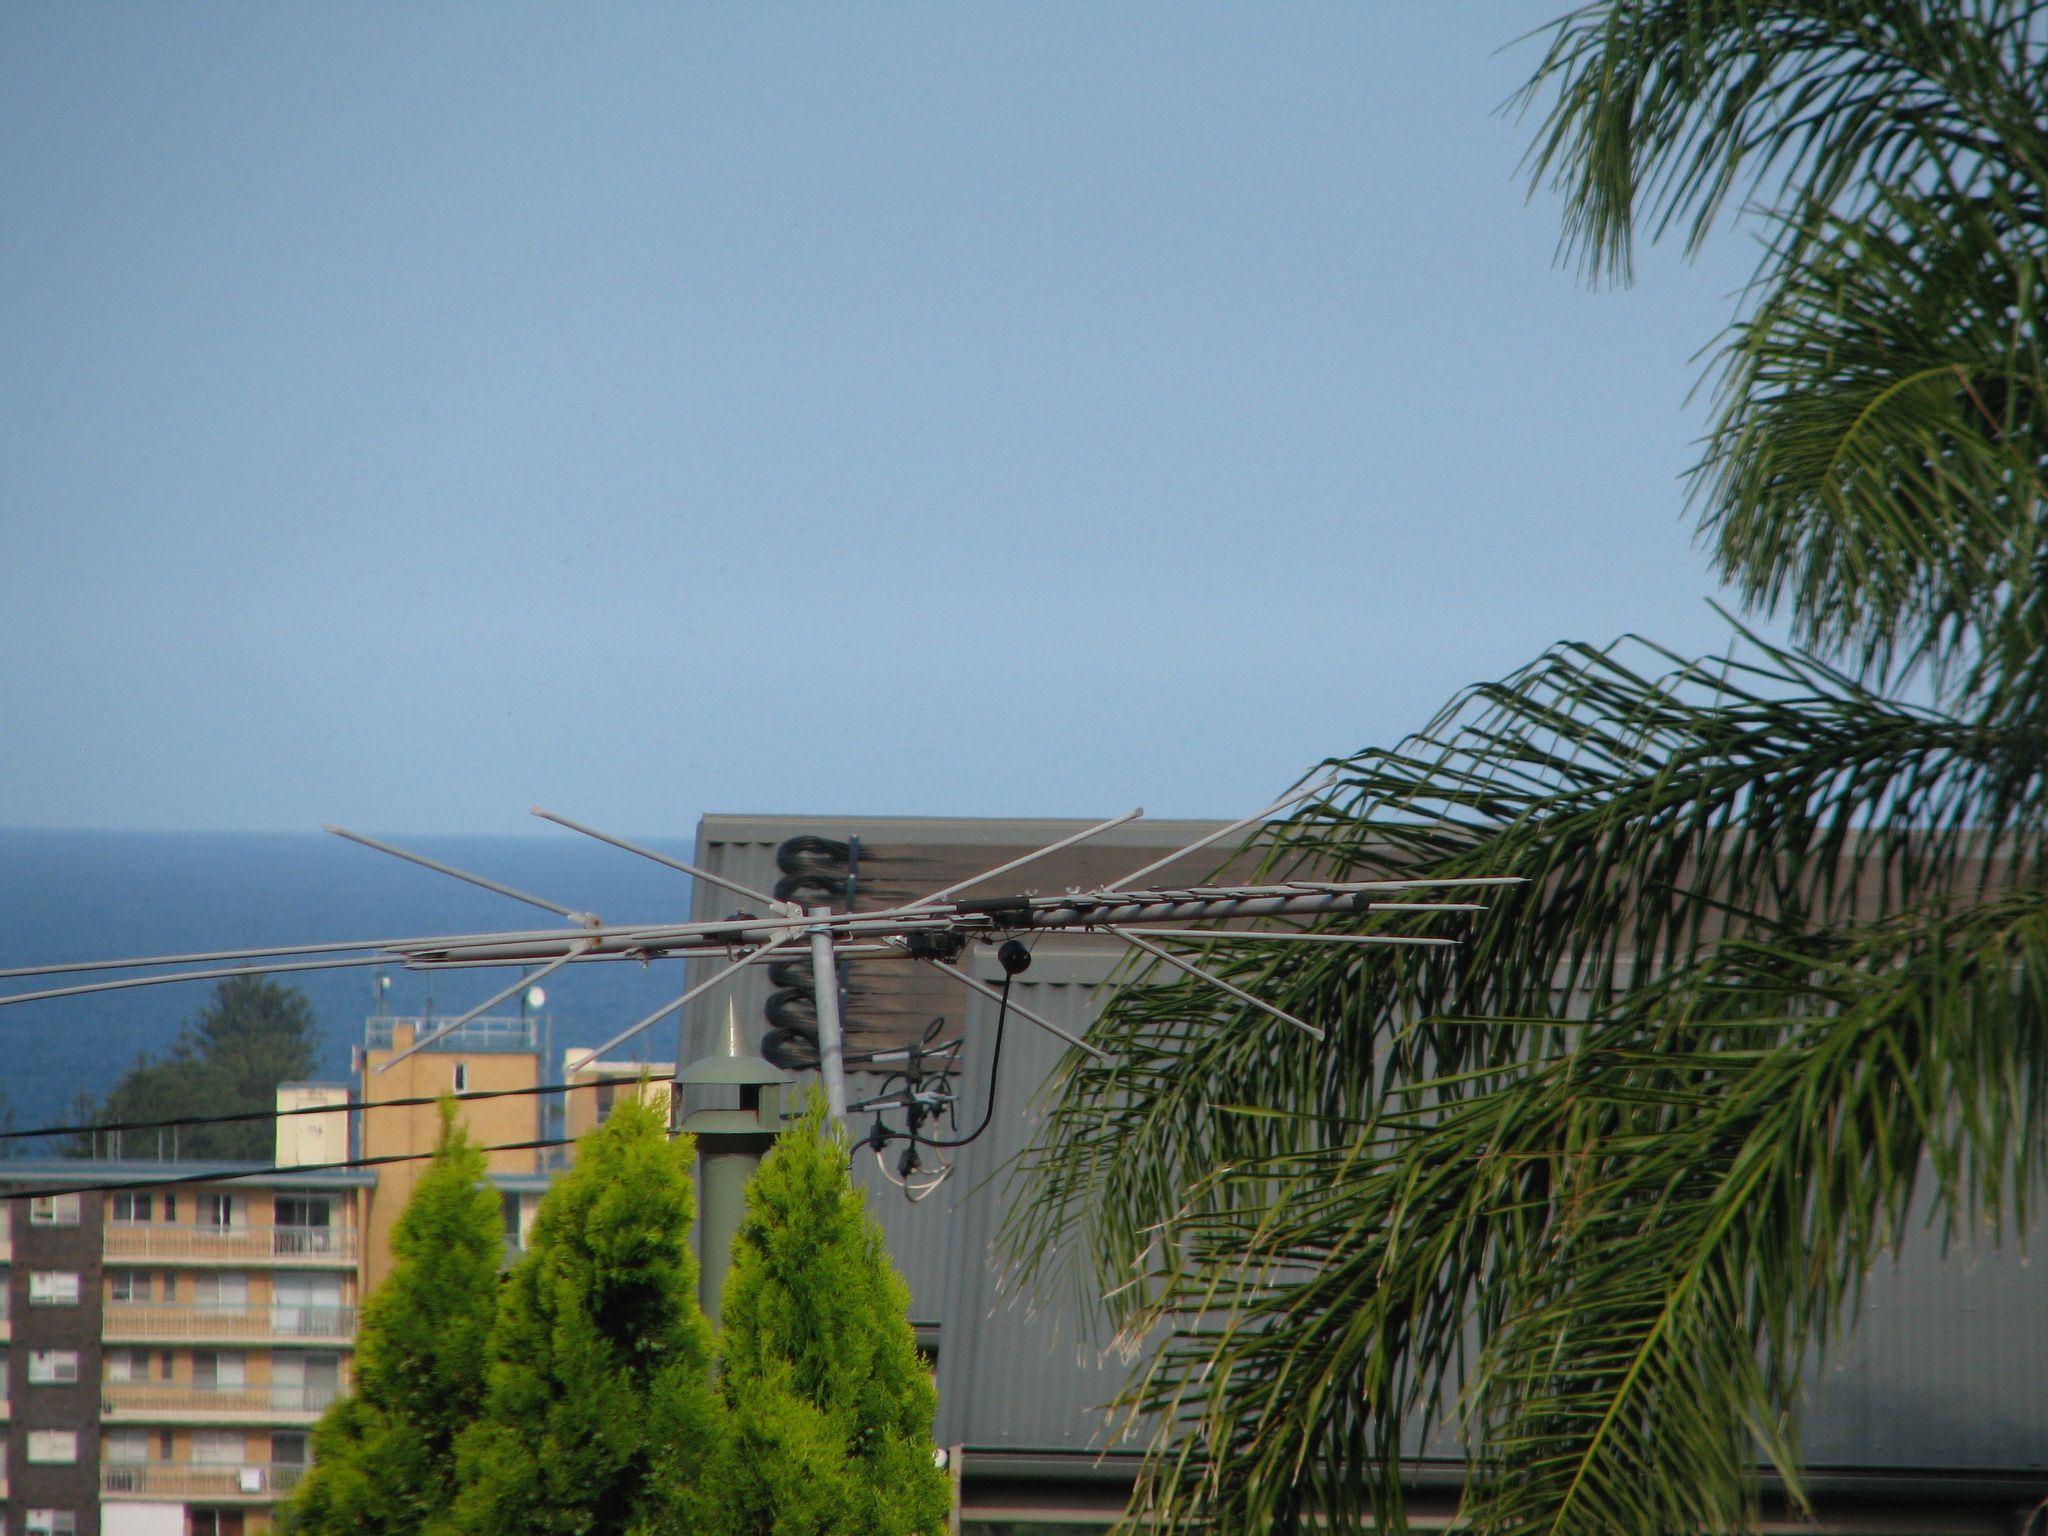 A very zoomed-in version of the previous photo, showing a TV antenna that was barely visible before.